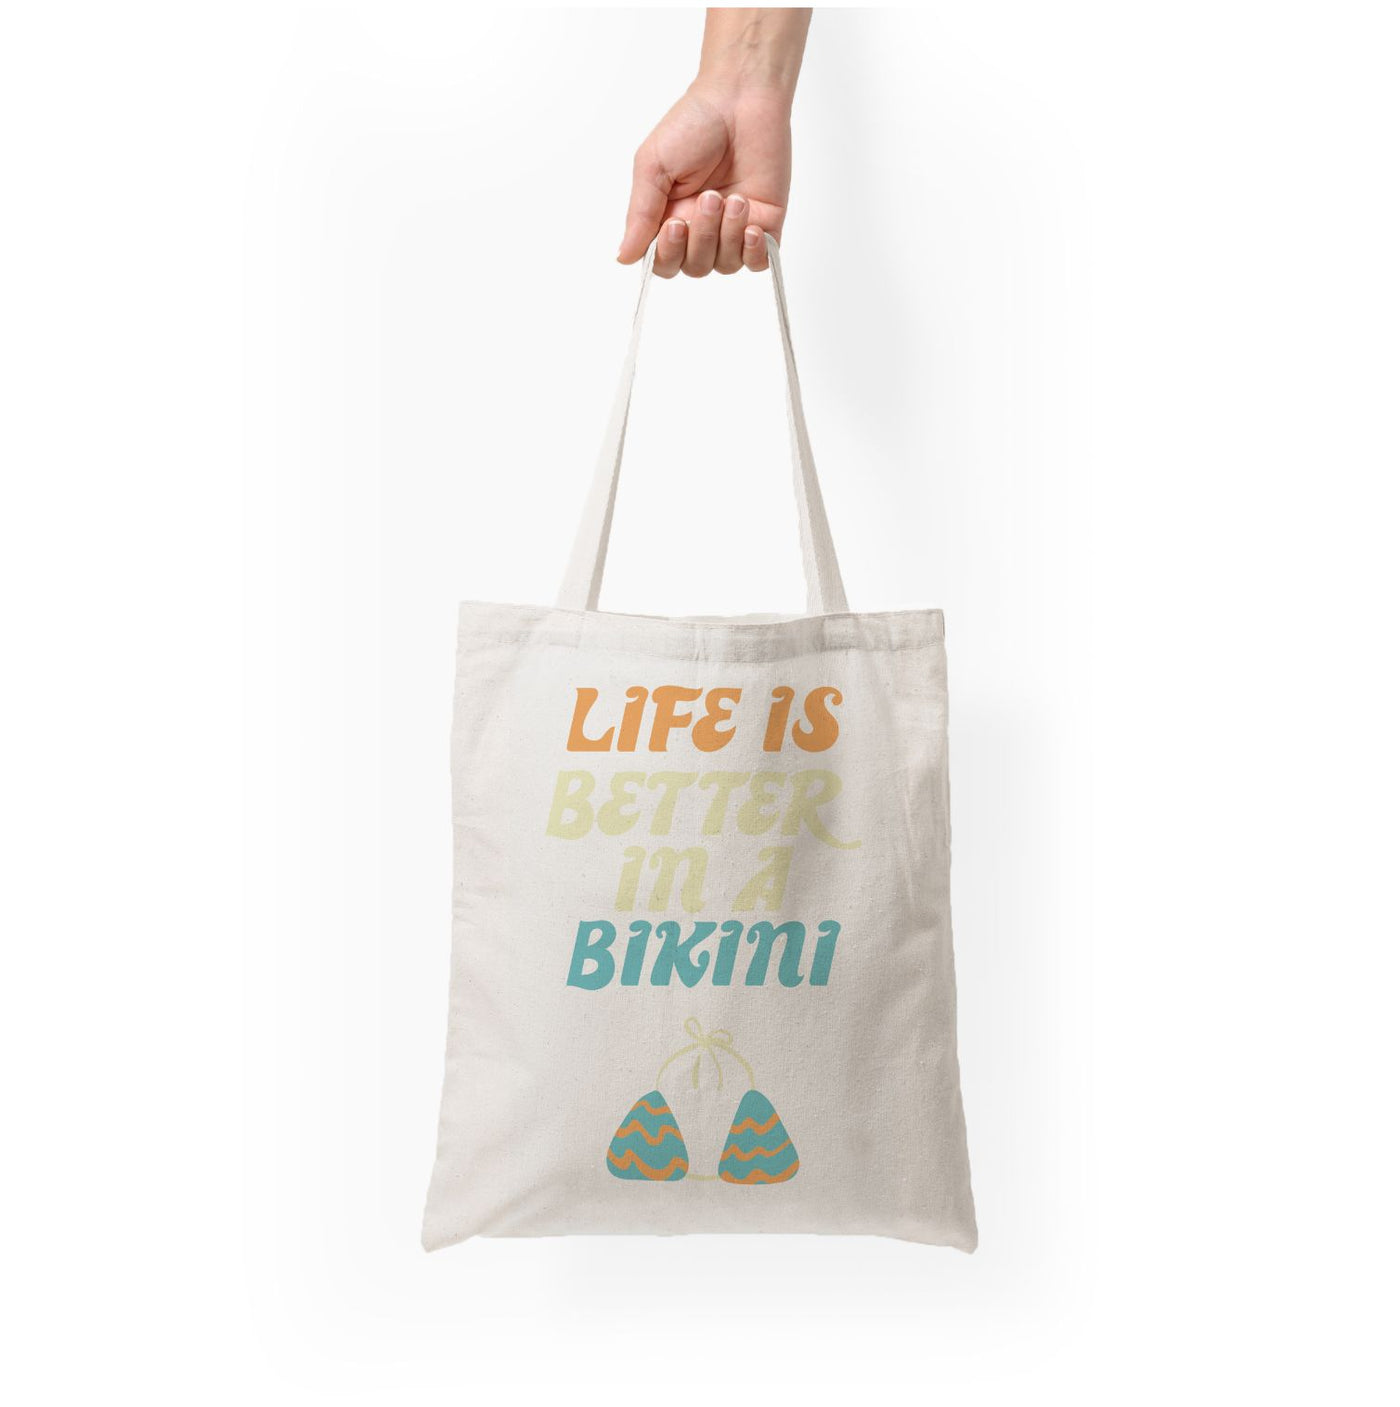 Life Is Better In A Bikini - Summer Quotes Tote Bag